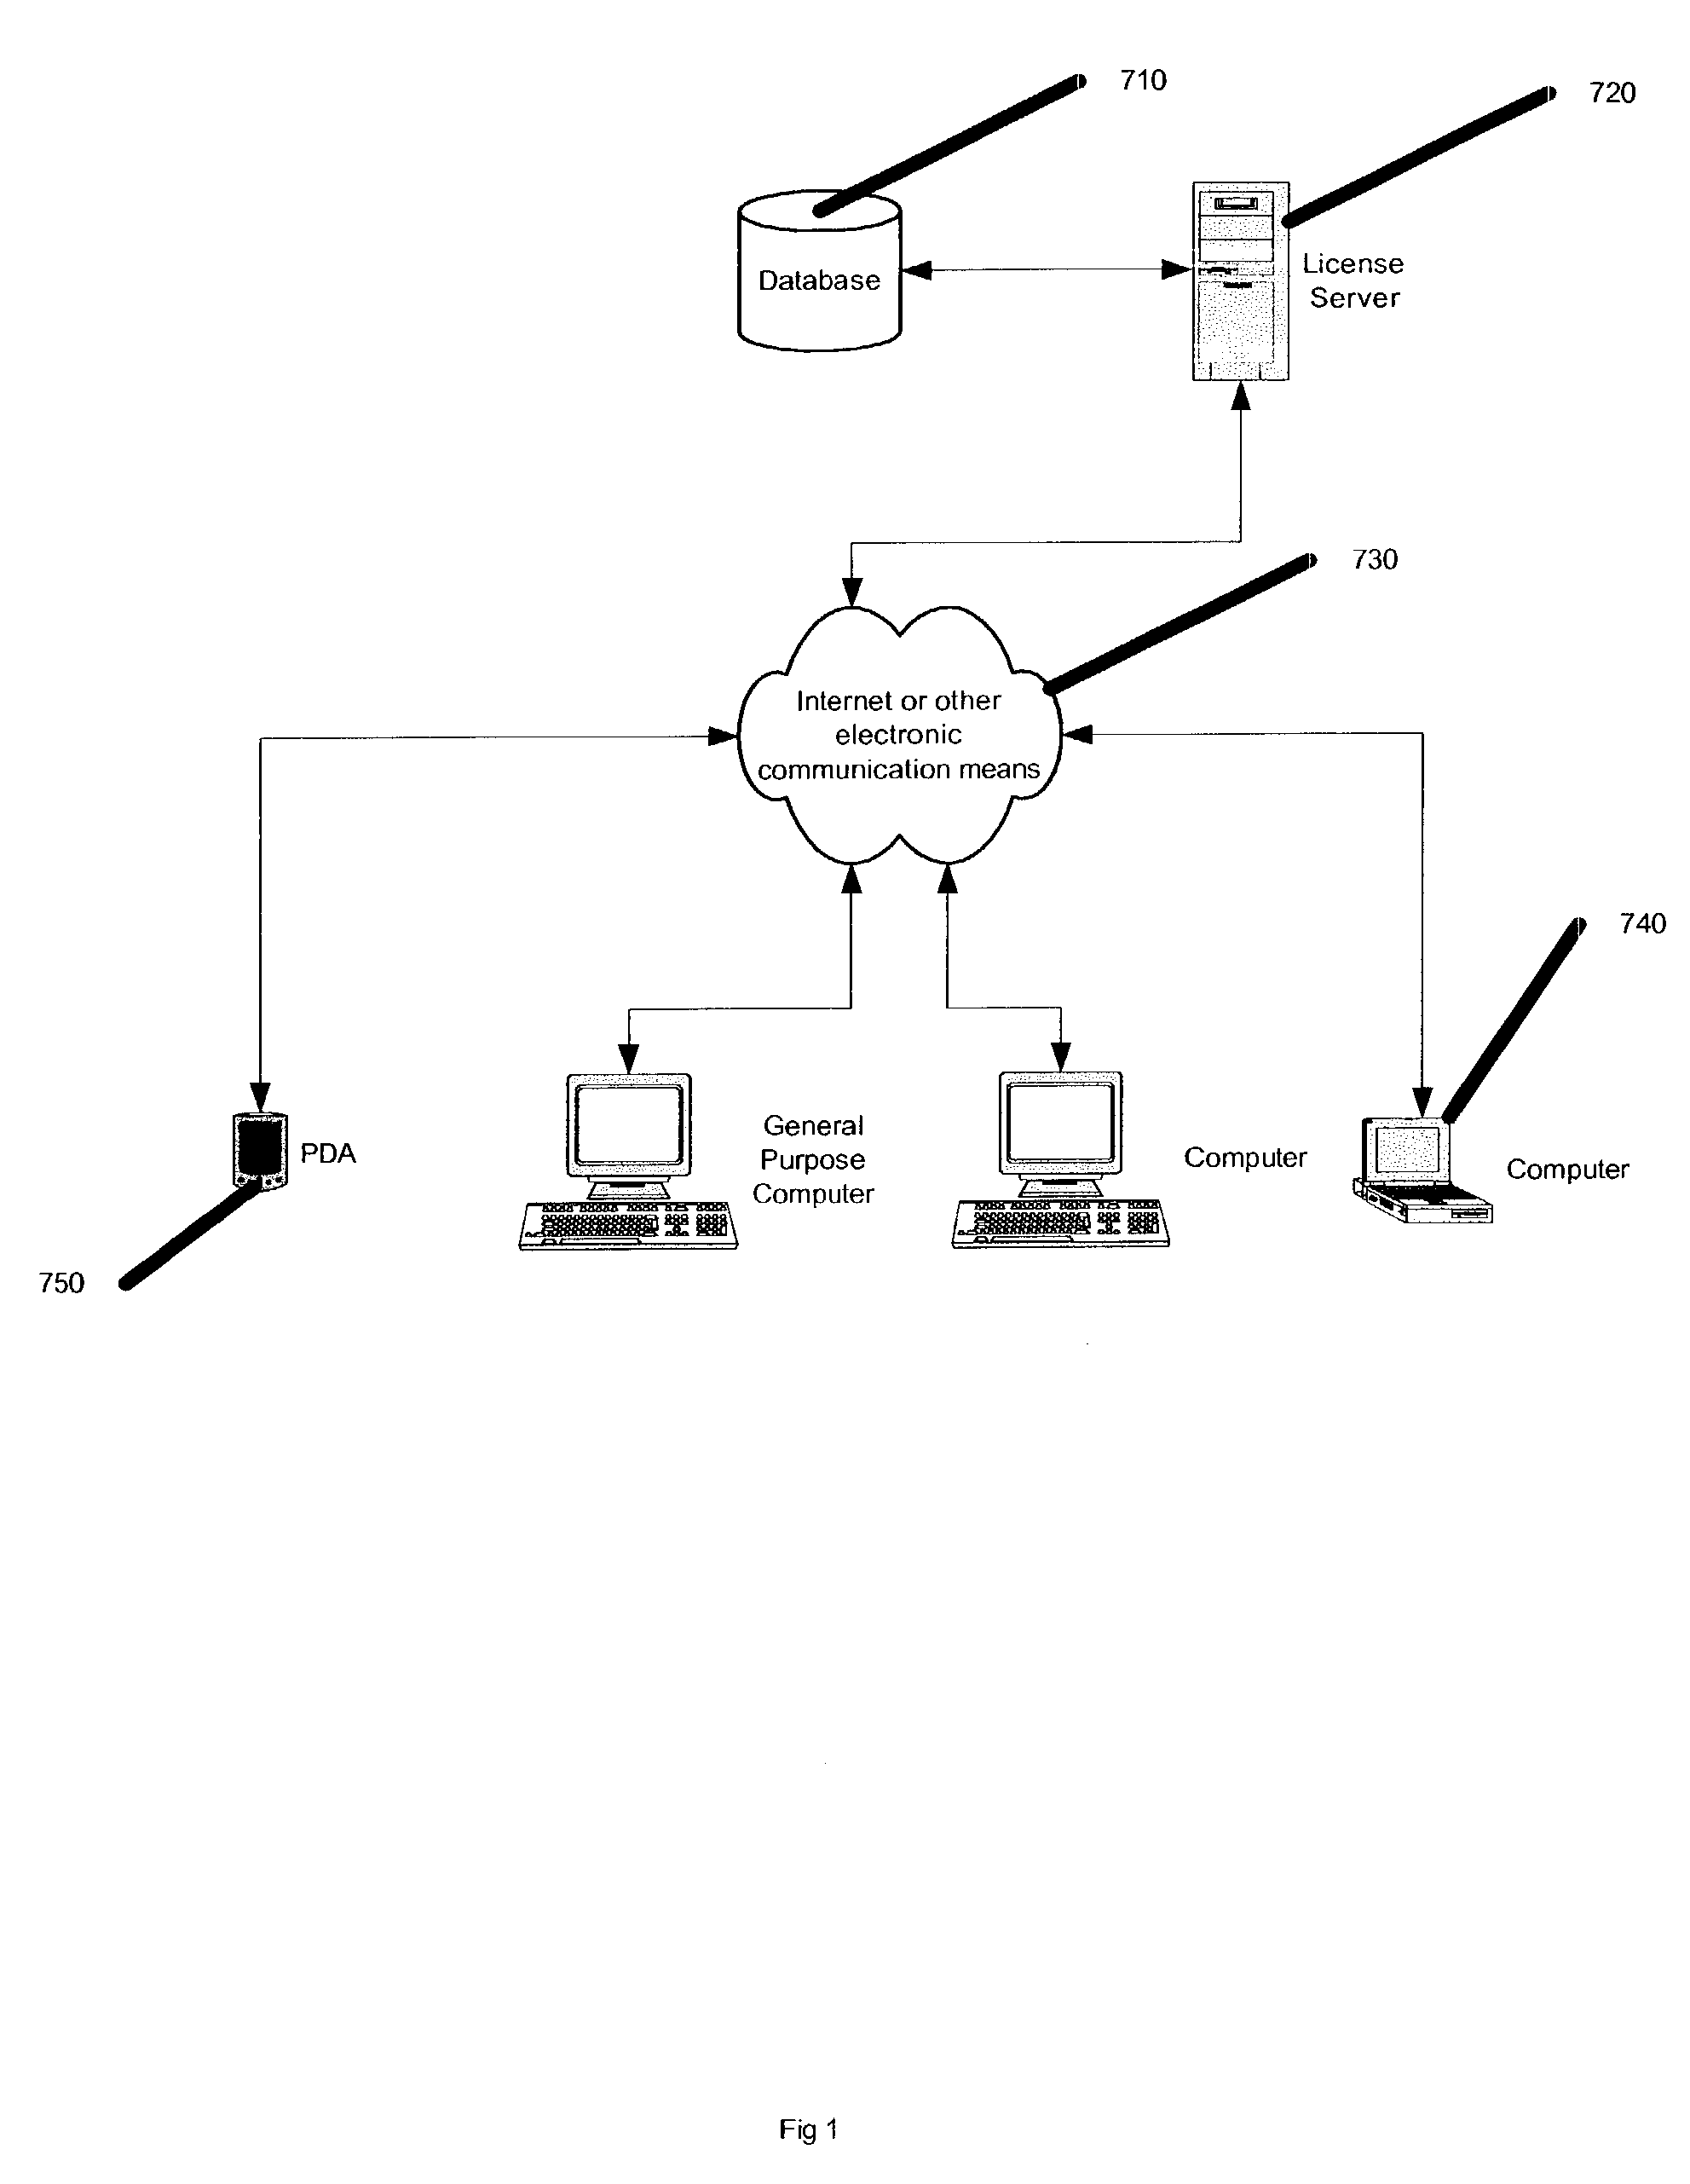 Computerized method and system for monitoring use of a licensed digital good